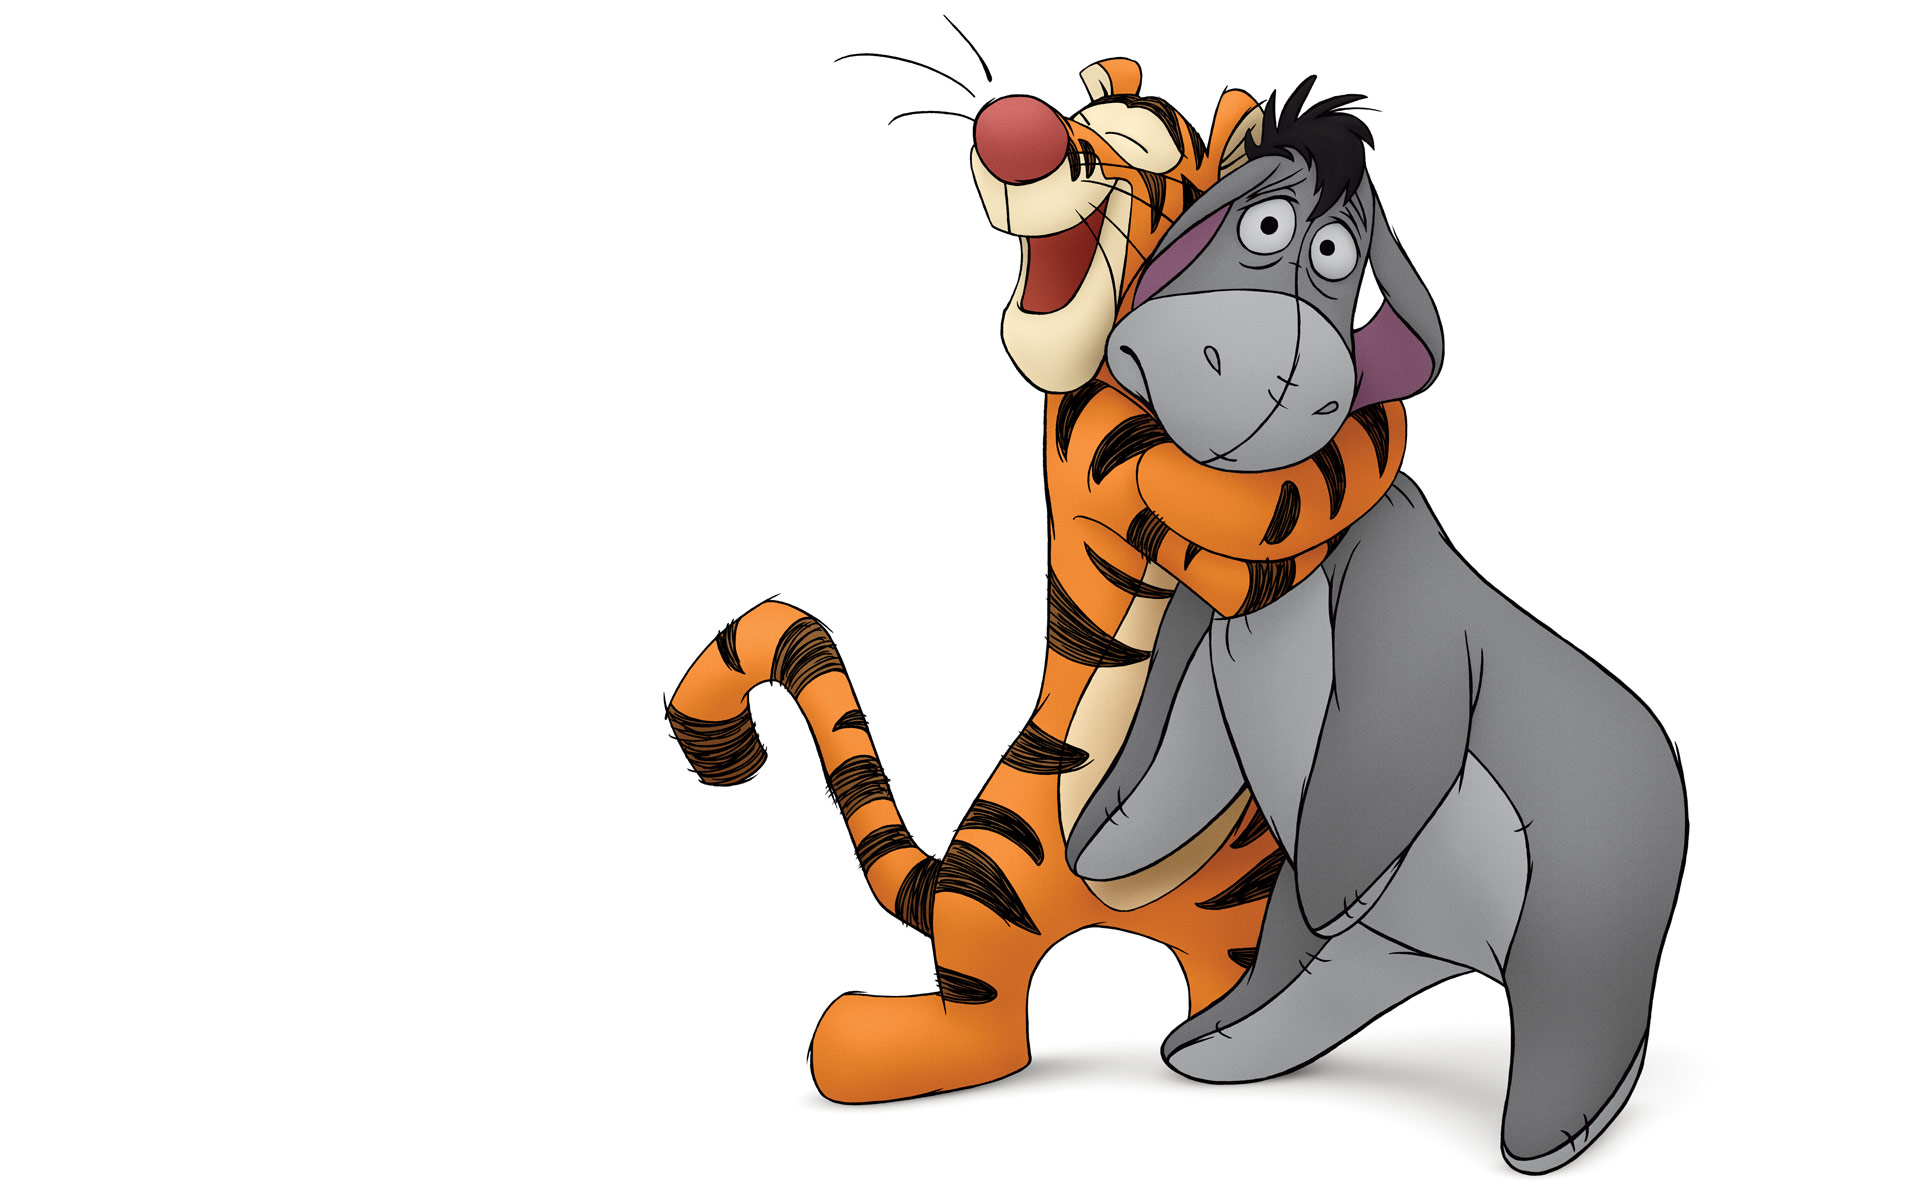 Tigger the tiger and Eeyore the donkey from Winnie the Pooh wallpaper